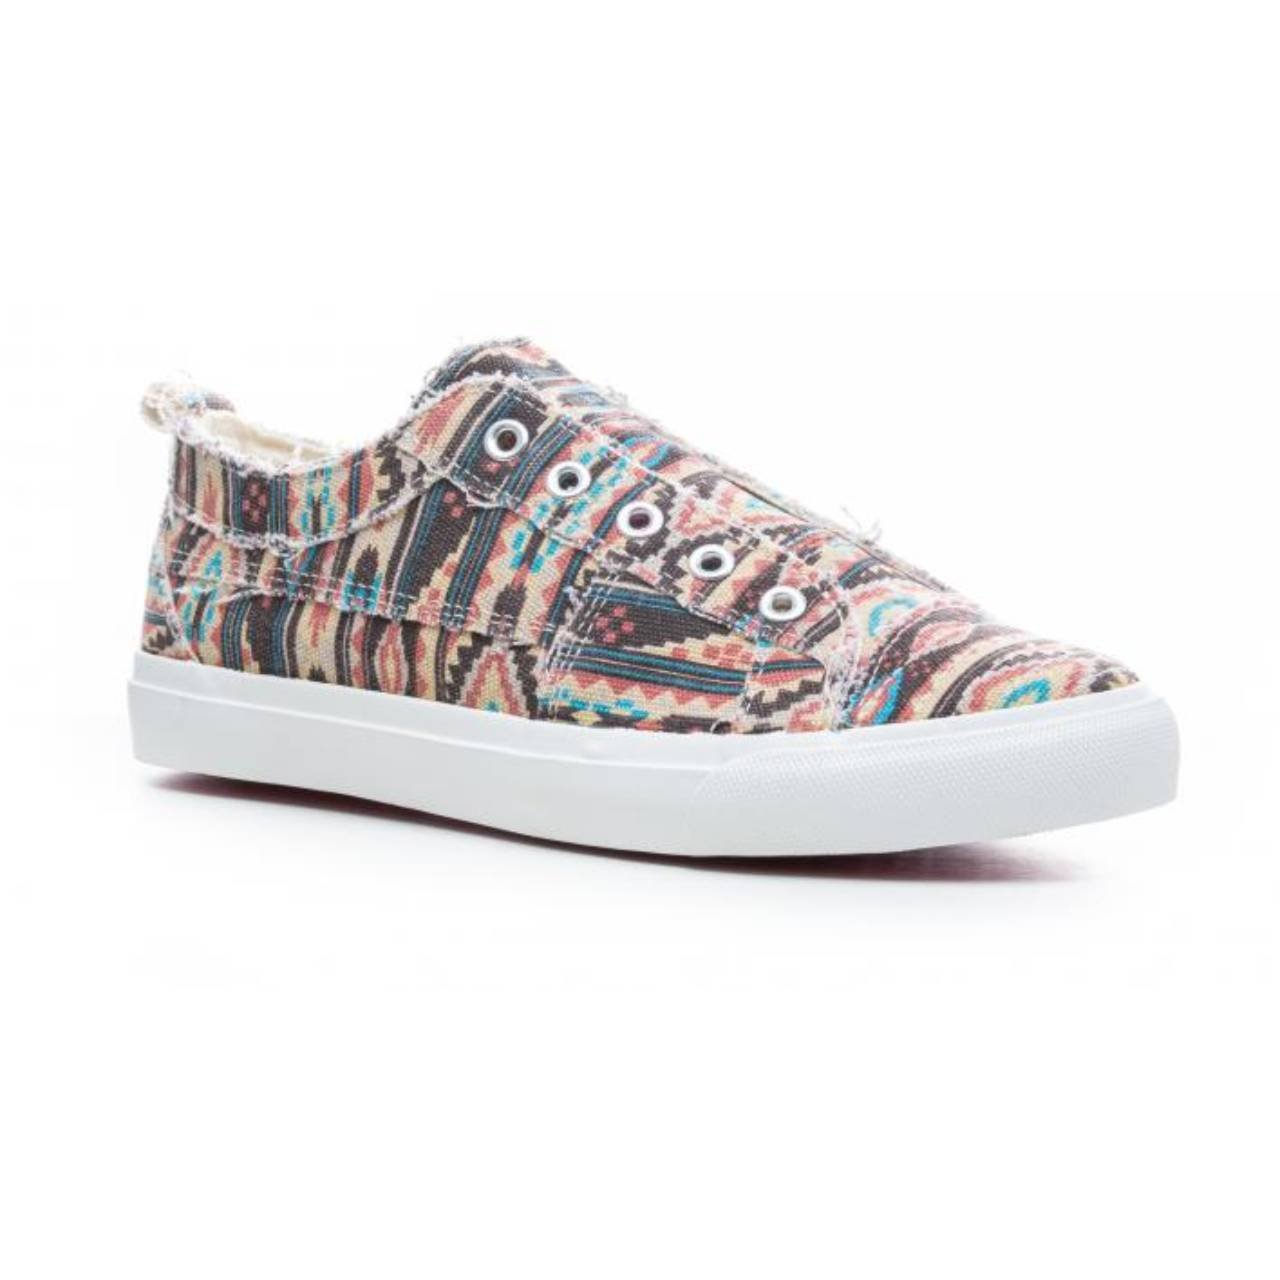 Corky's Babalu Pink Aztec Tennis Shoes - The Graphic Tee